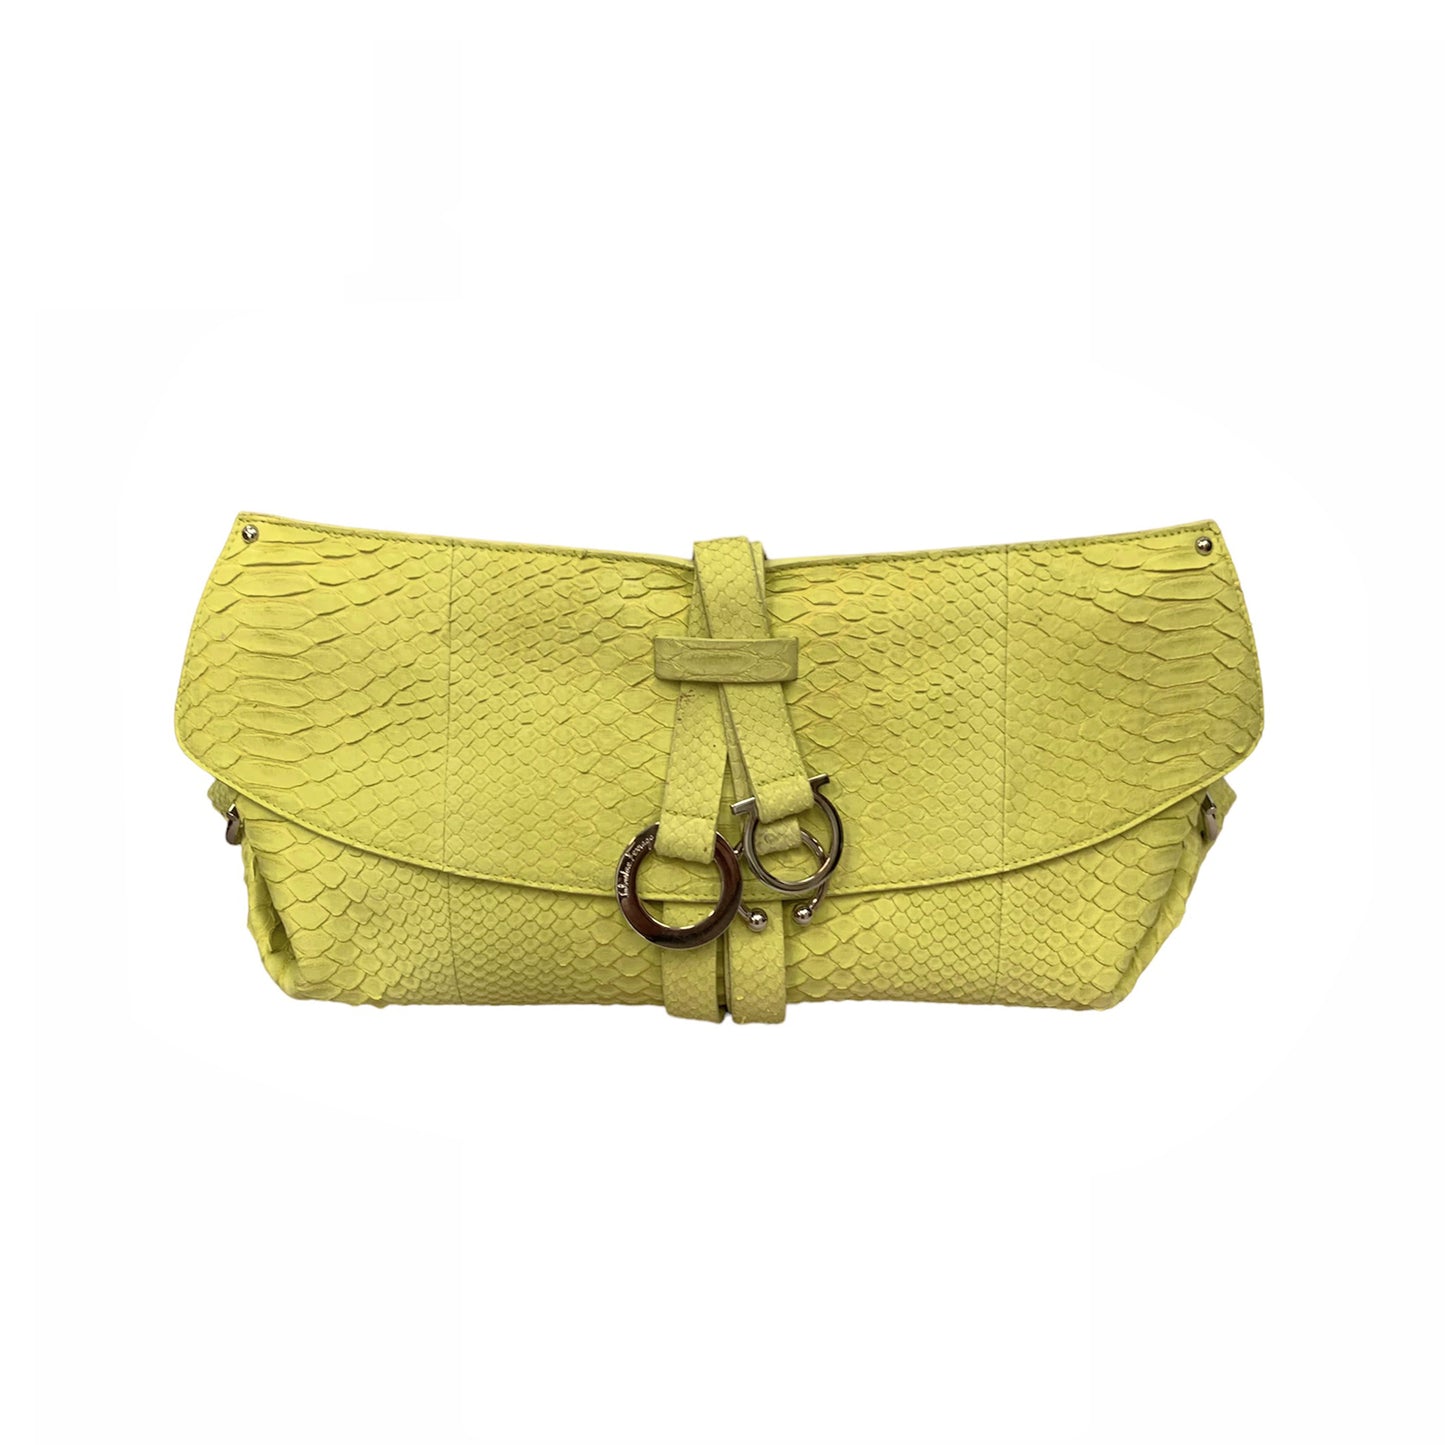 Load image into Gallery viewer, Salvatore Ferragamo Lime Snake-Print Clutch
